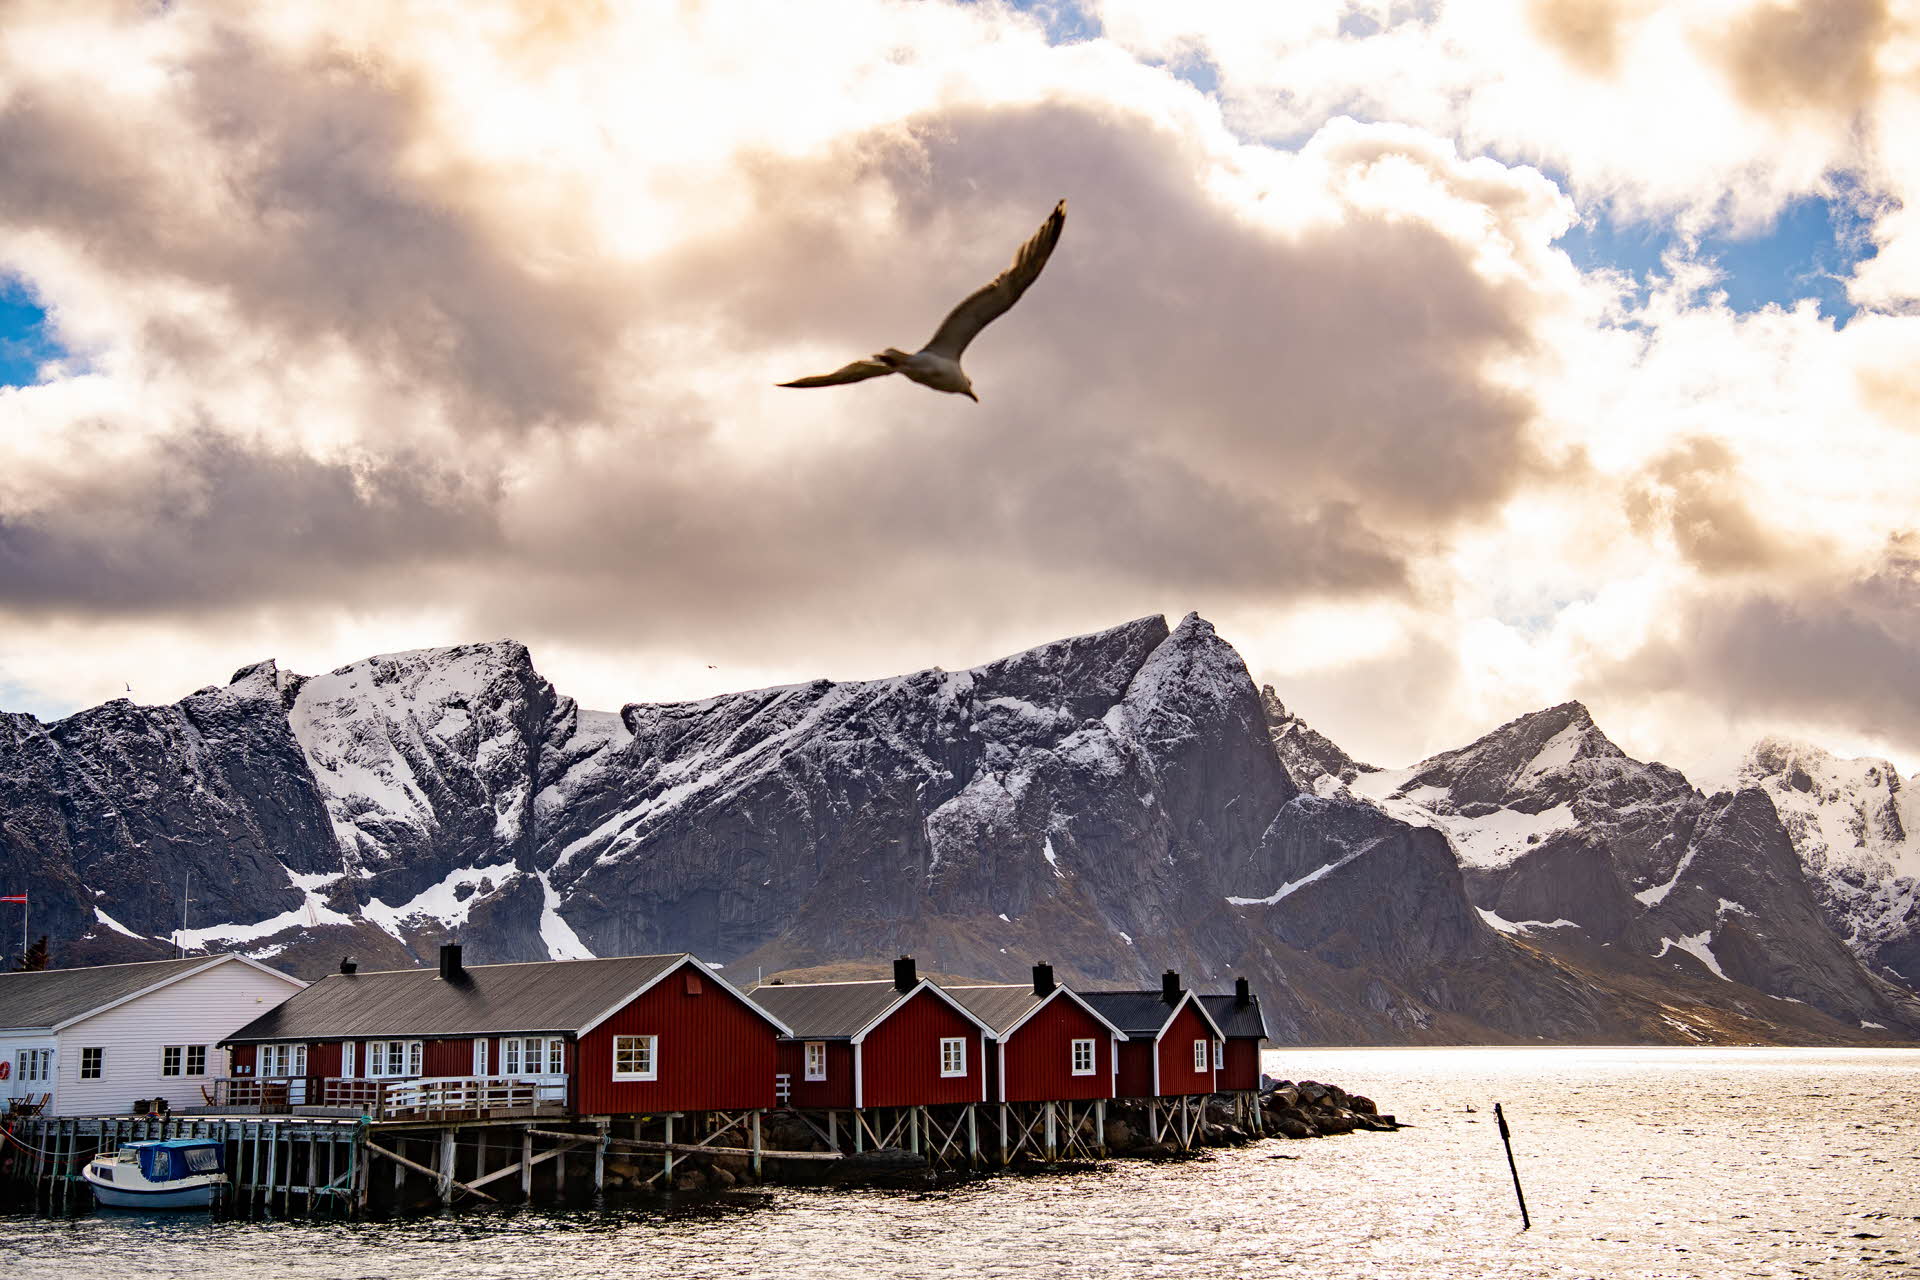 A seagull flying above red fisherman's cabins beneath  the mountains.